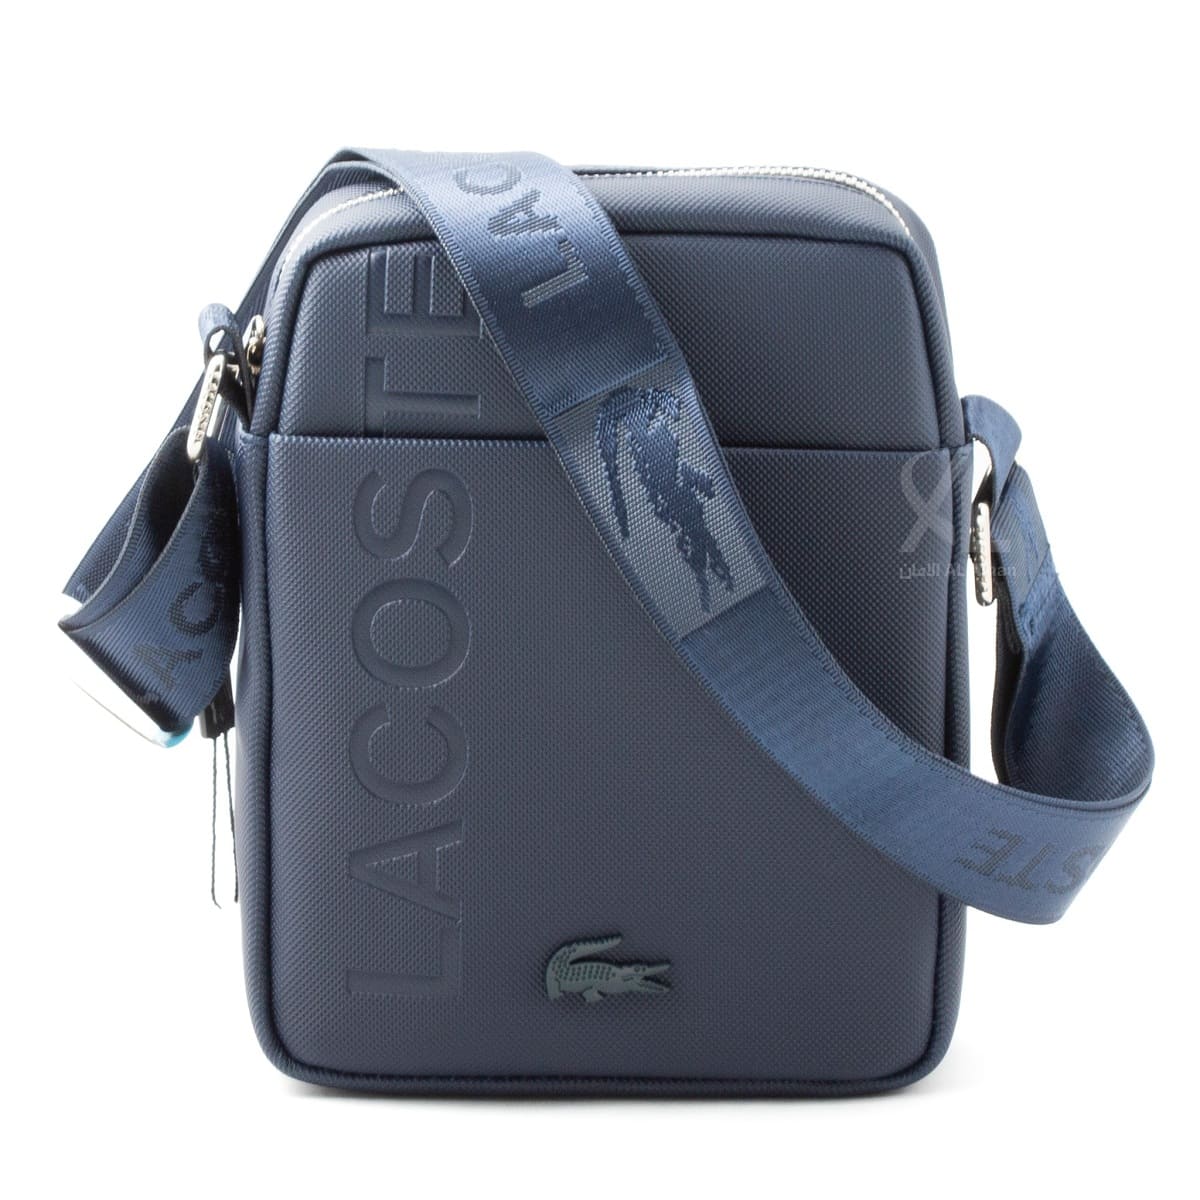 Lacoste-crossbag-with-hand-blue-color-leather-for-men